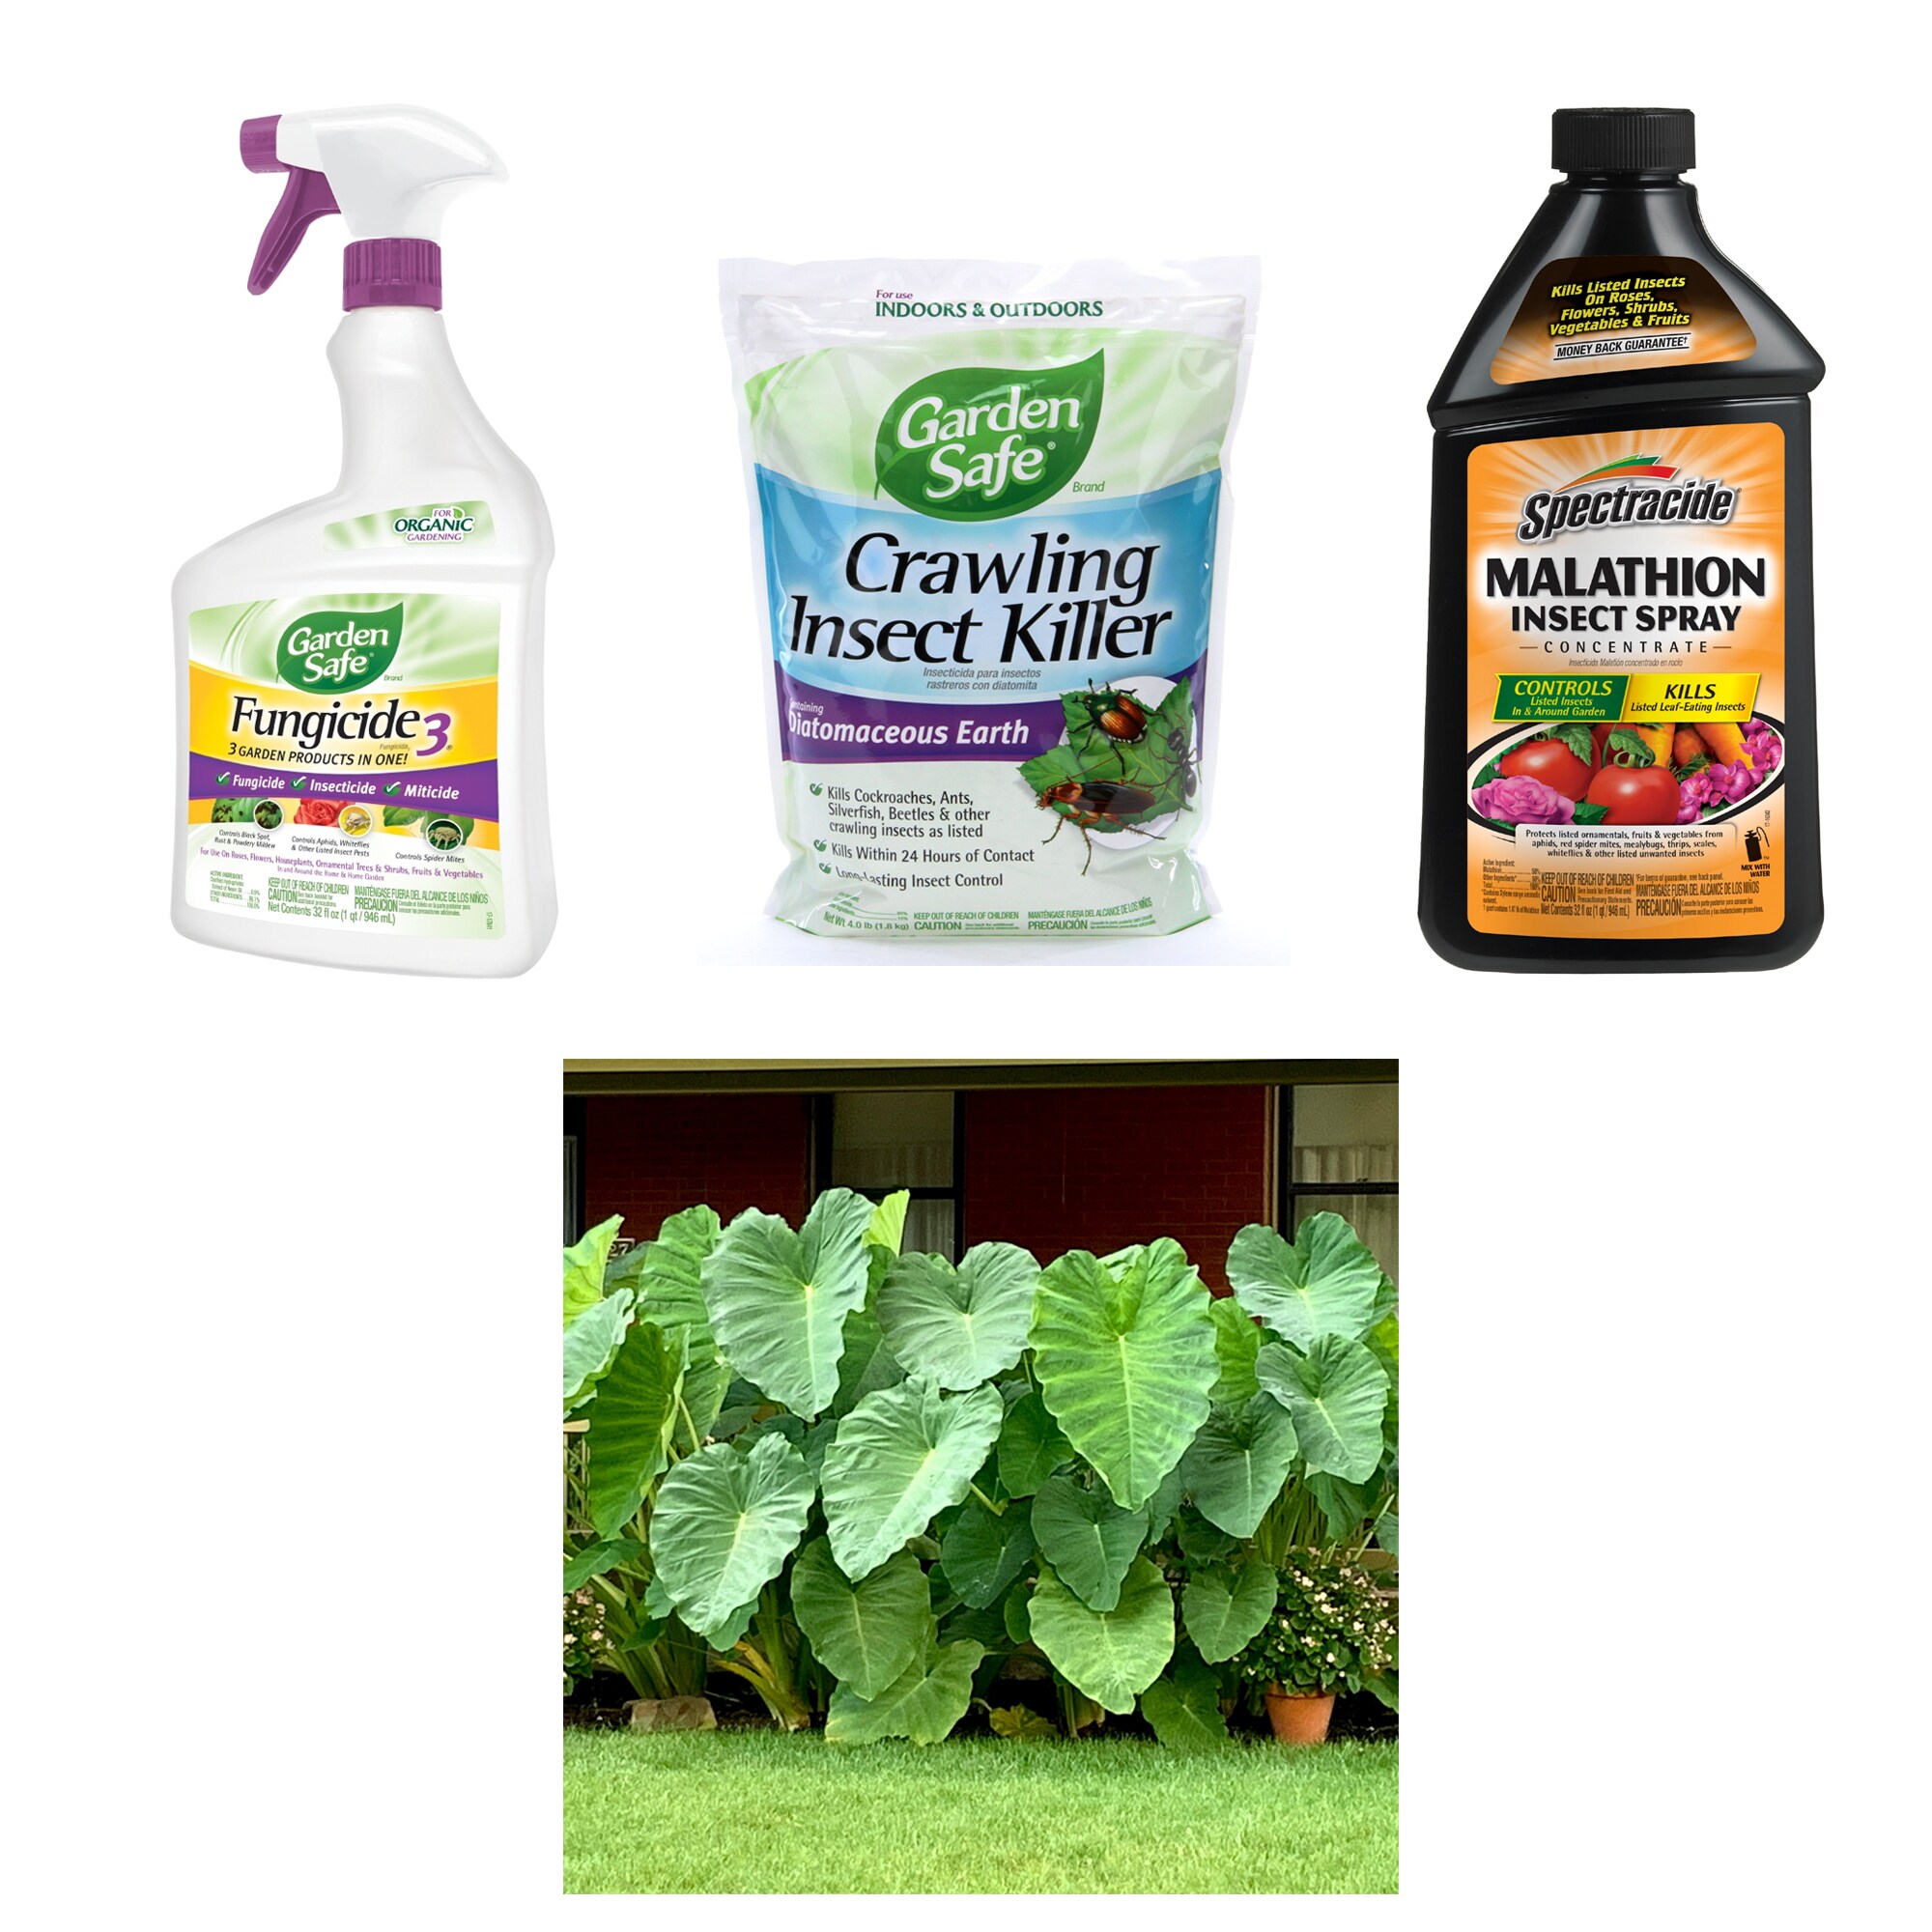 Garden Safe 32 oz. Houseplant and Garden Insect Killer Ready-to-Use  HG-93214 - The Home Depot